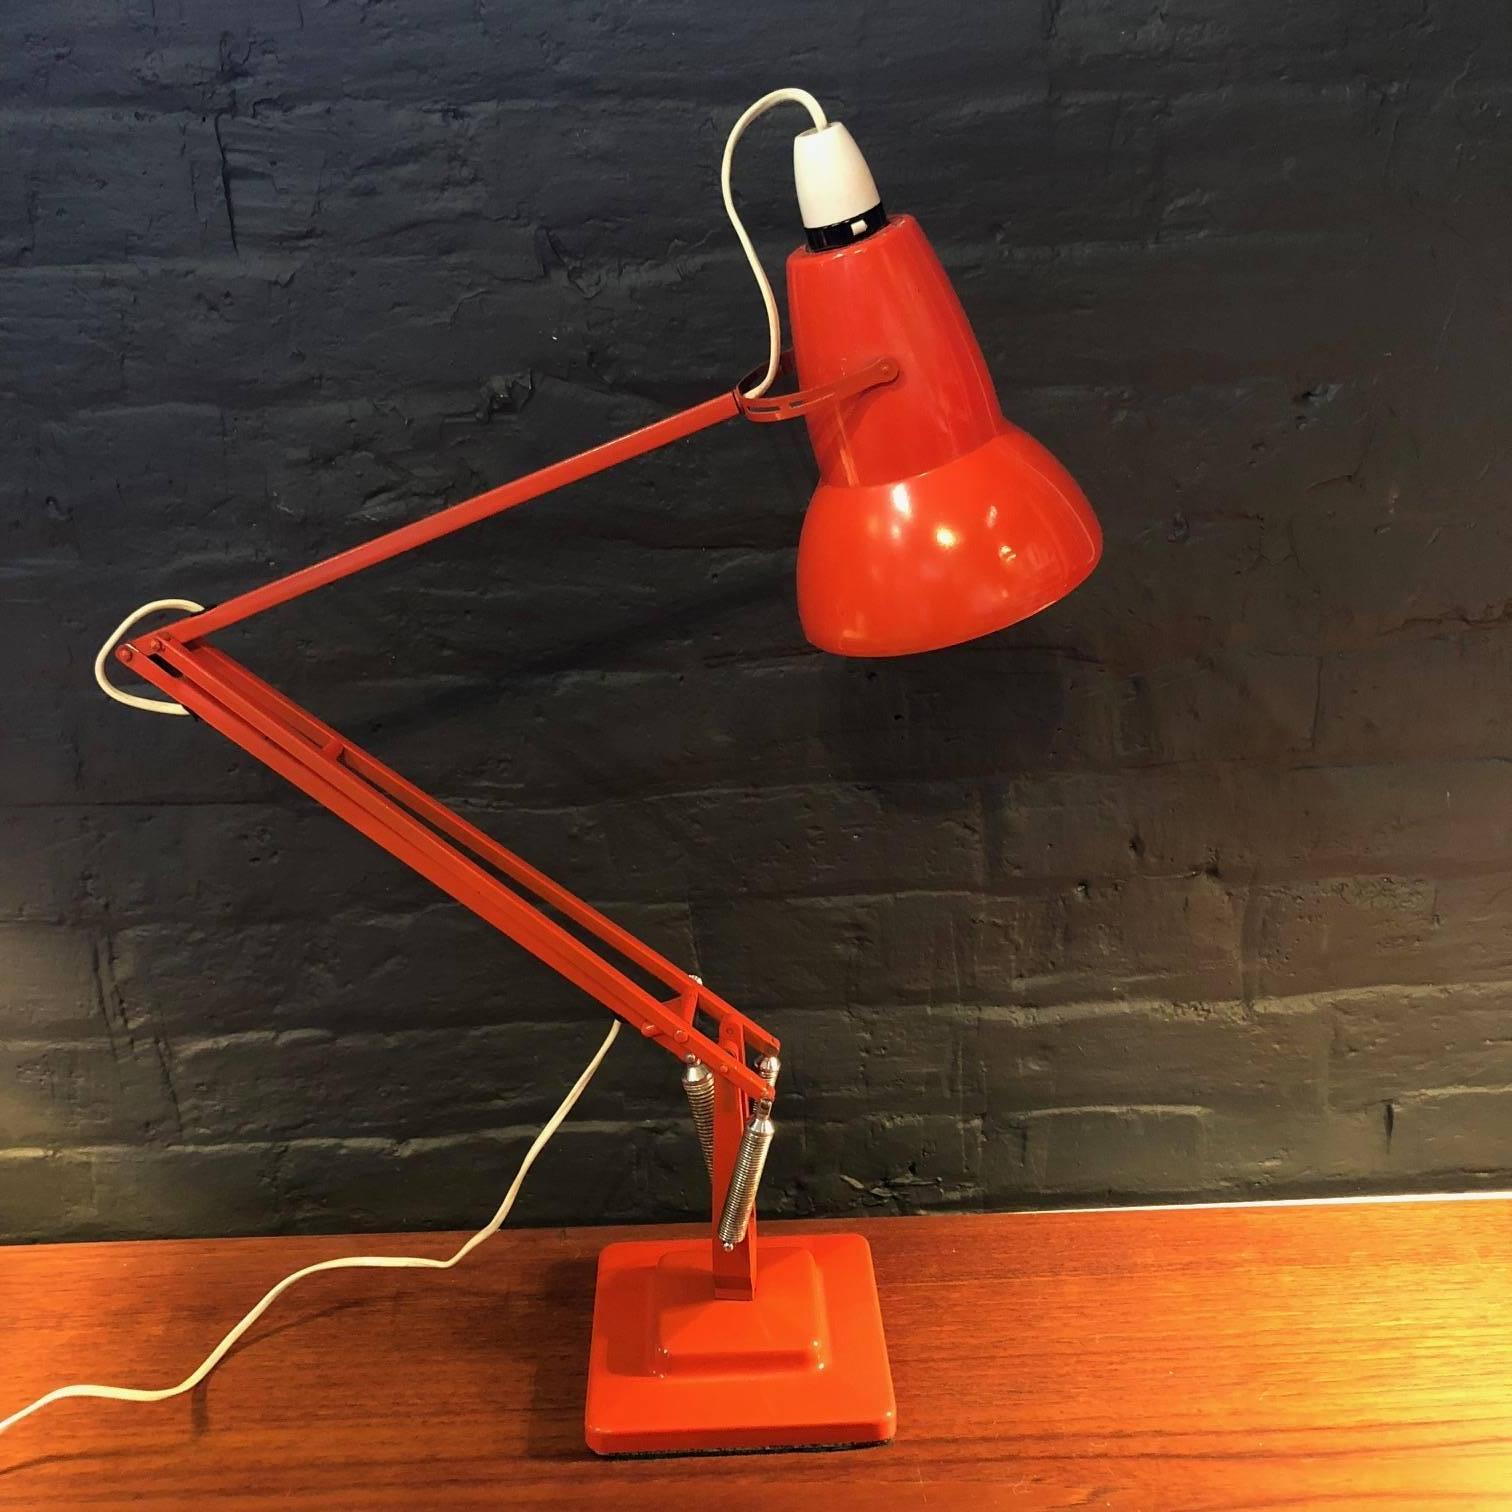 Designed by George Carwardine for Herbert Terry & Sons and made in Redditch, England, this is a lovely example of an original 1930s designed Anglepoise lamp.

This is the later (1960s) model with tulip shade, two stepped base and adjustable